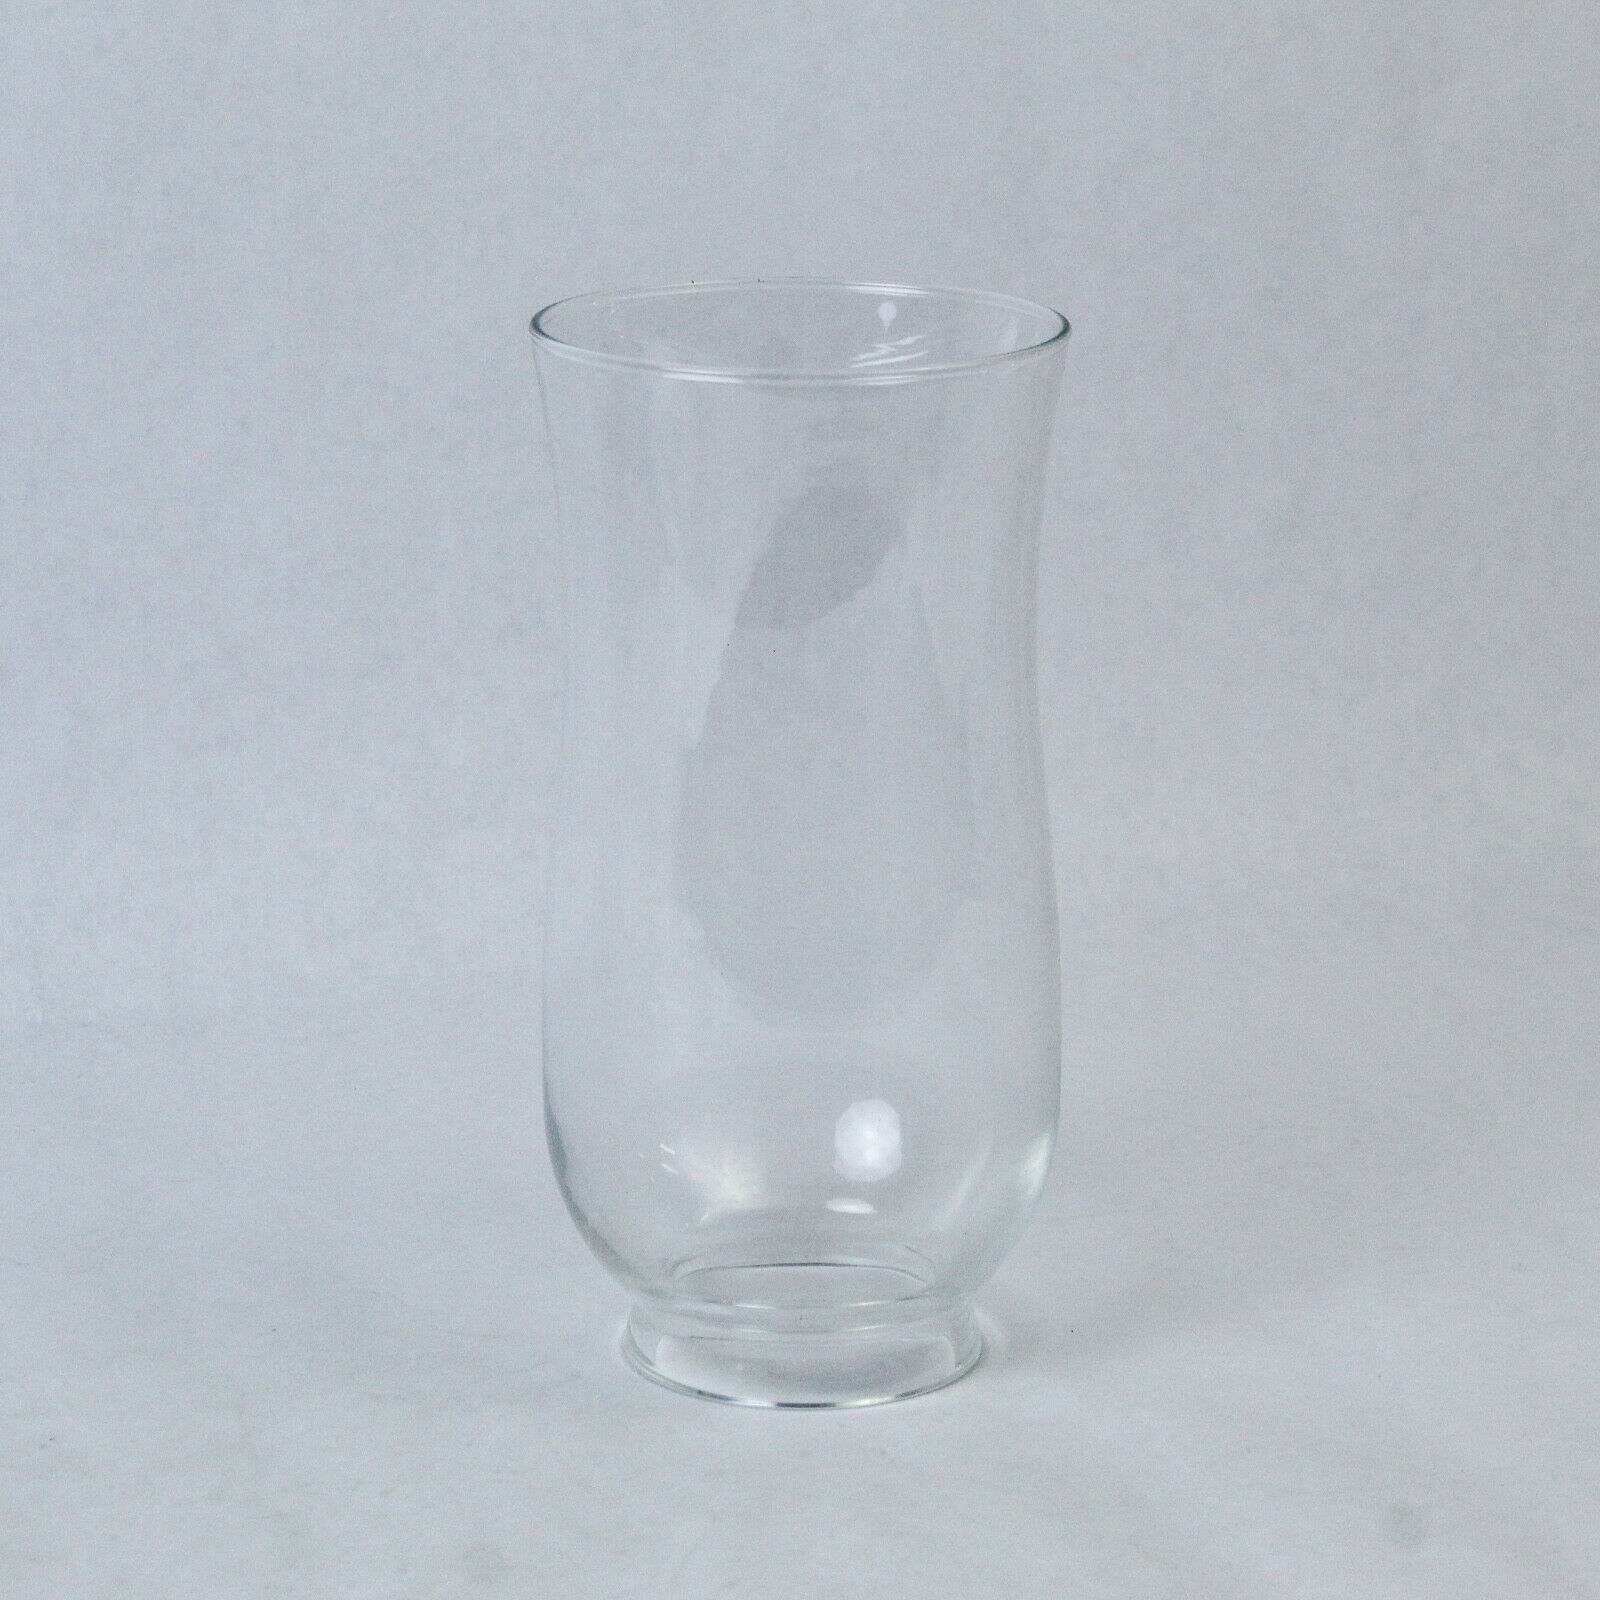 Unbranded Hurricane Lamp Replacement Clear Glass Globe 7.5 Inches Tall Decor